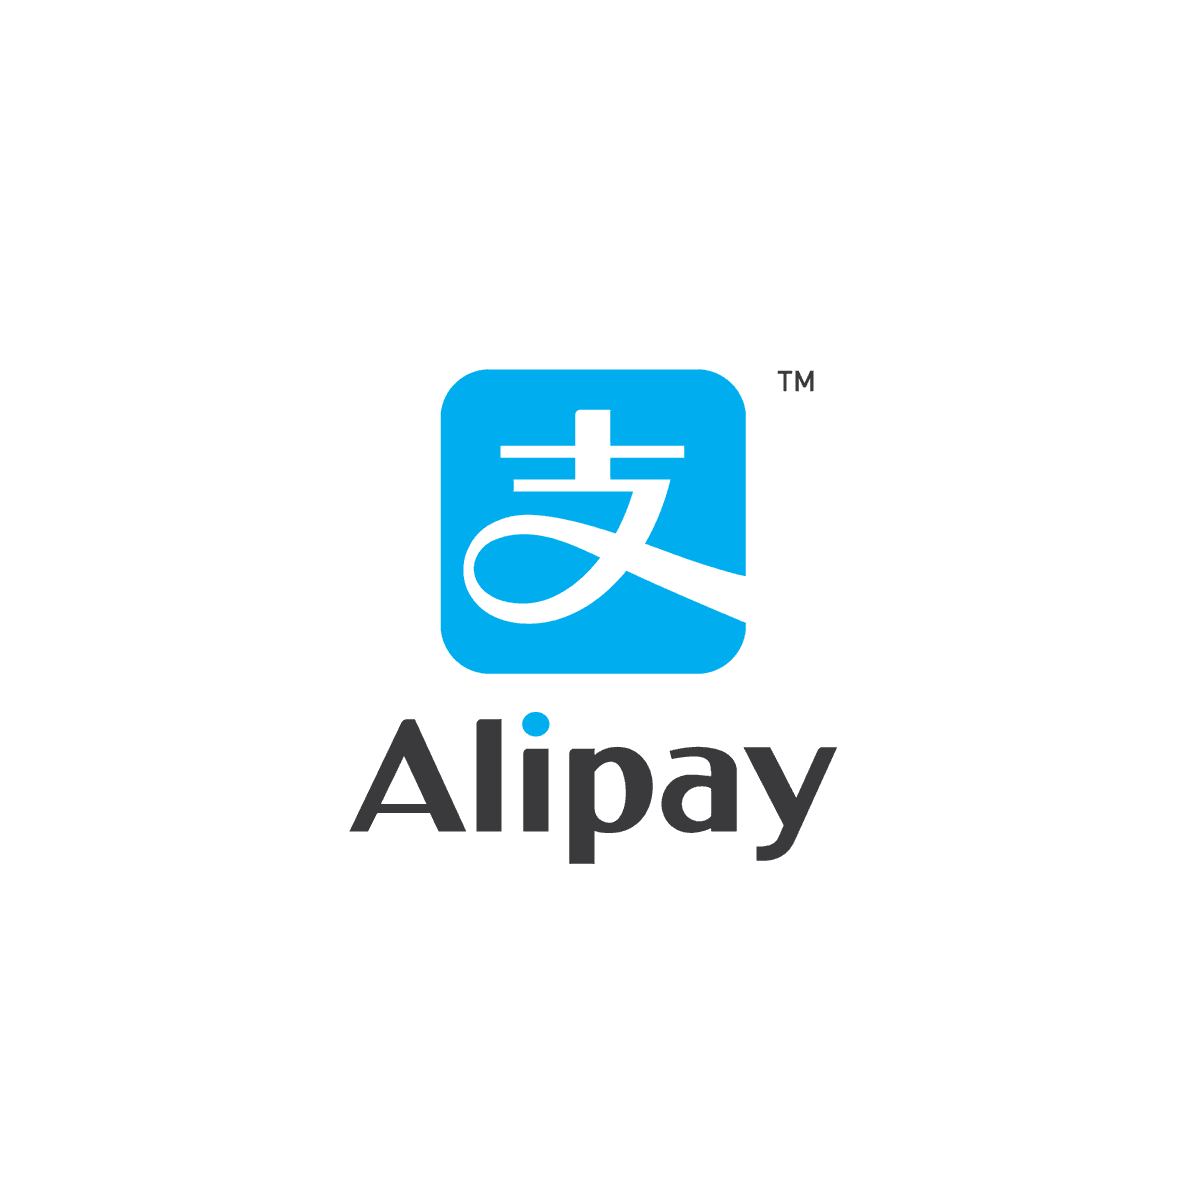 FUCK YEAH 
IM SELLING ALIPAY MONEY/ BUFF BAL VIA ALIPAY TOPUP WITH THE BEST RATE HERE 

1 USDT = 7.28 RMB (for buff topup only)
if you want to buy alipay money, dms